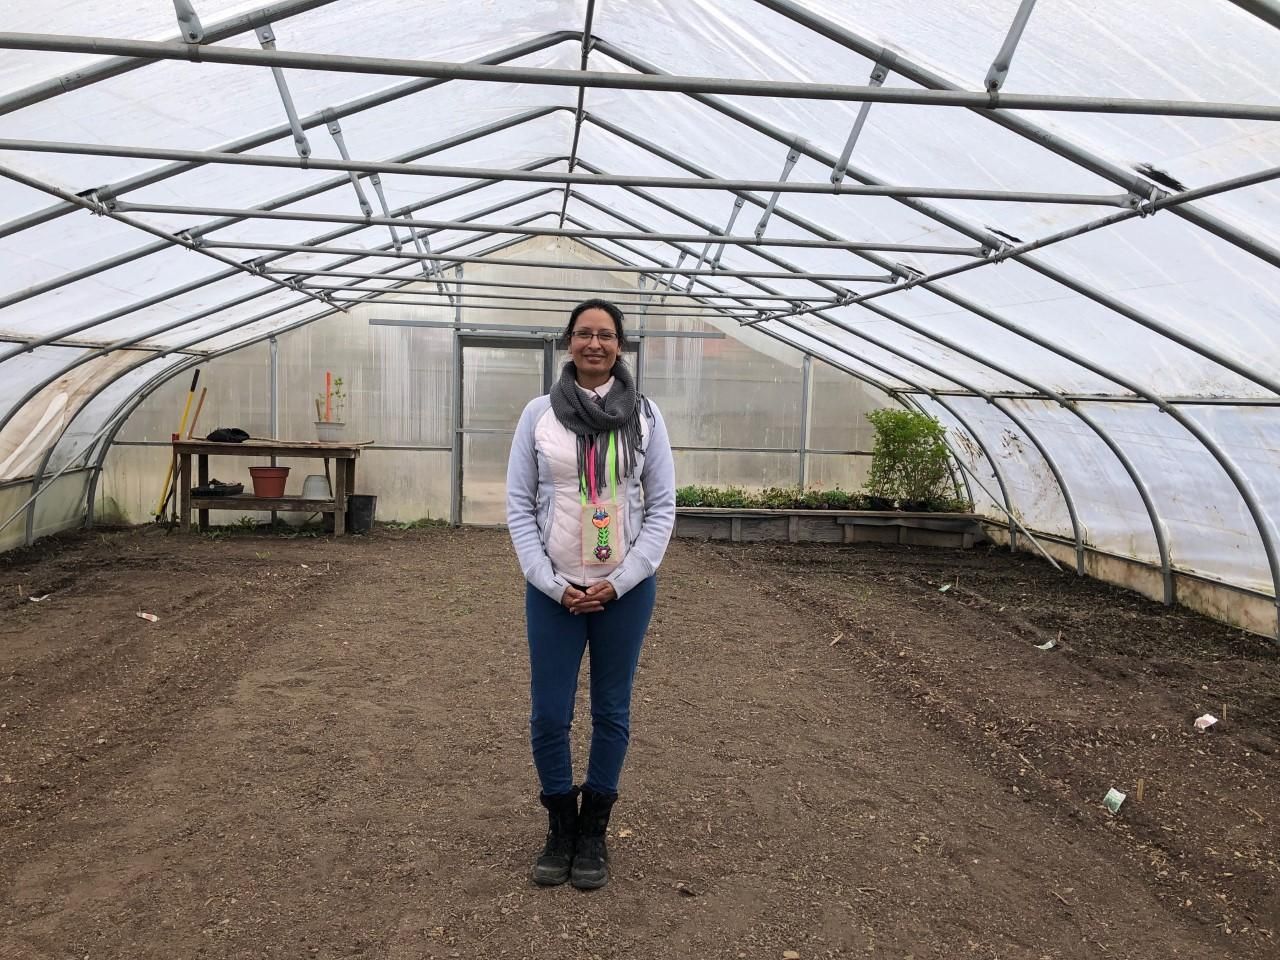 Angela Kingsawan joined the Walnut Way team in April. She already anticipates taking herbs and vegetables to market. Image by Susan Bence. United States, 2020.